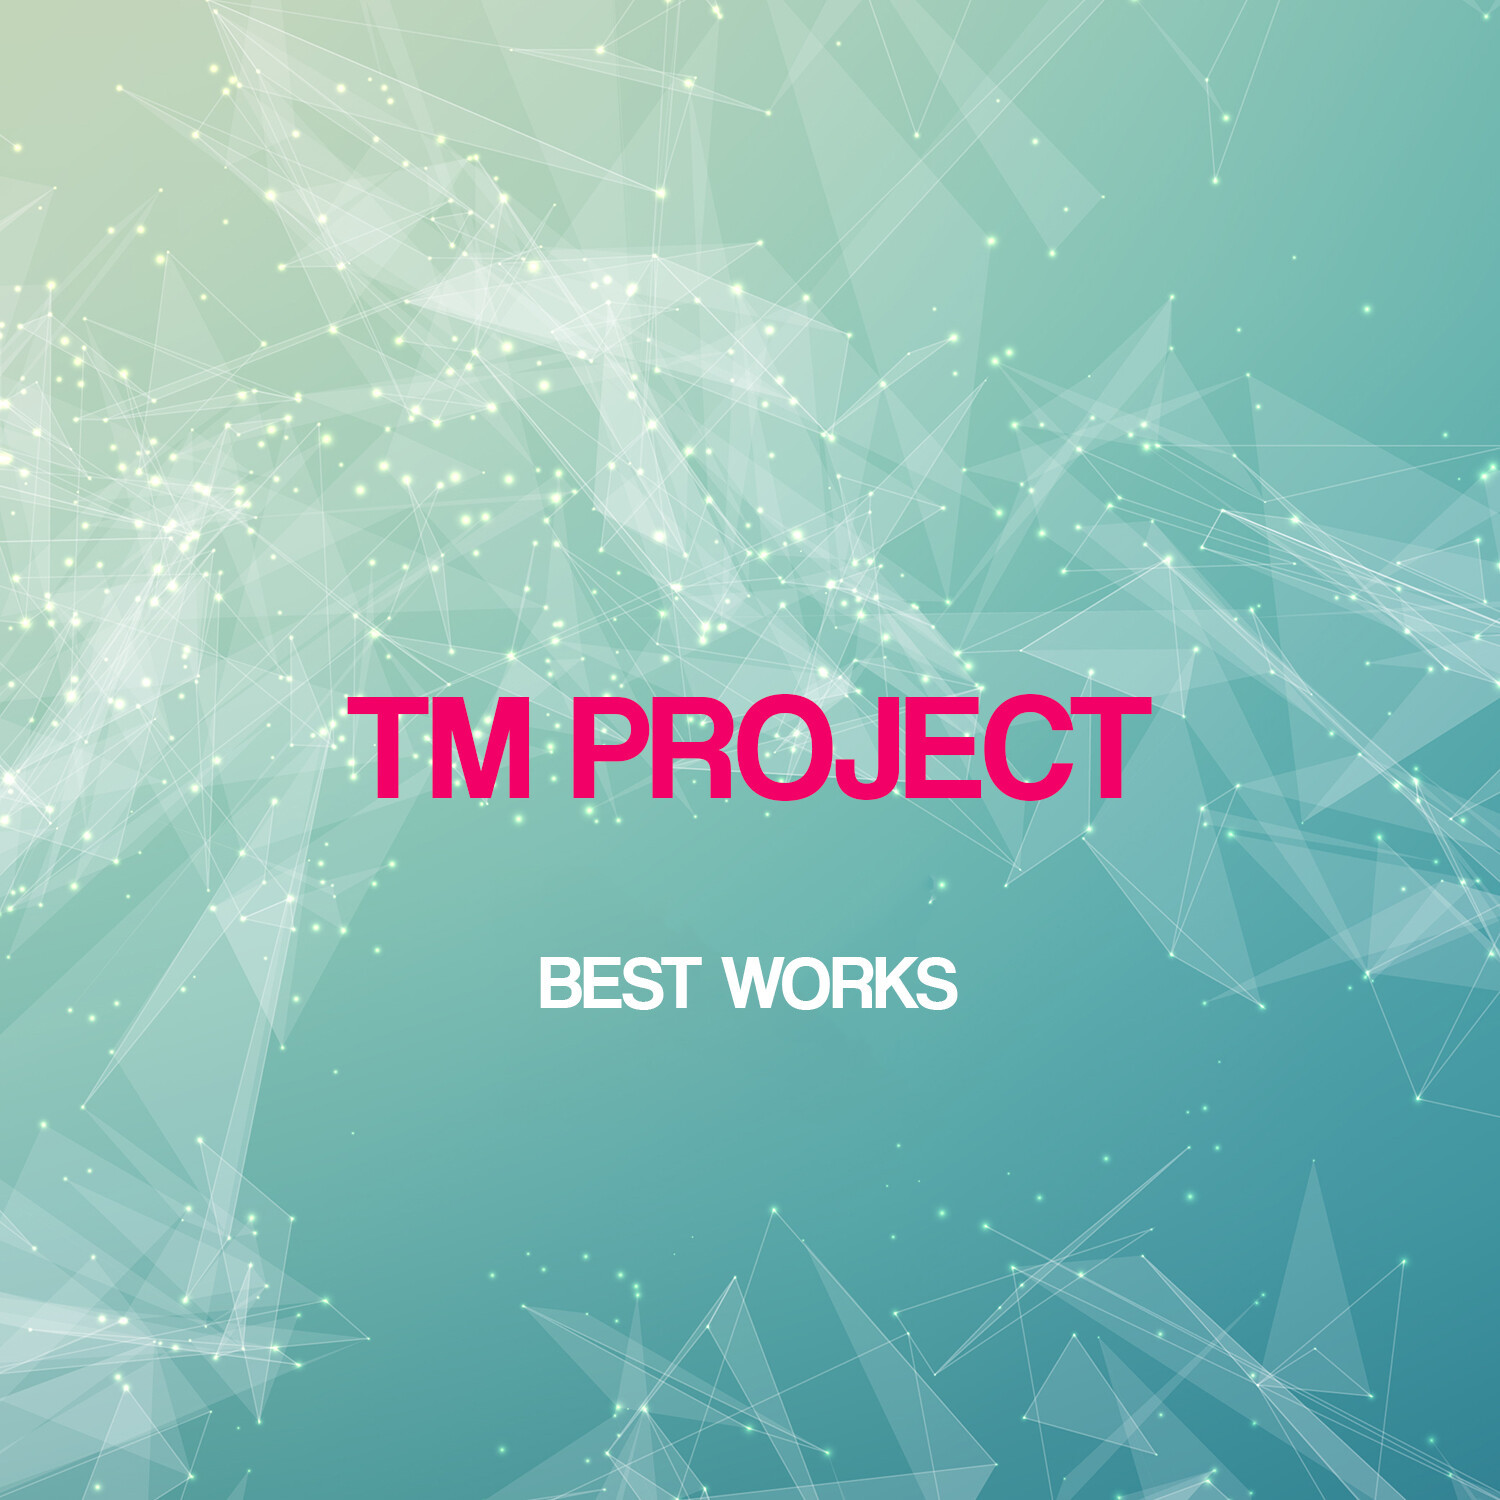 Tm Project Best Works